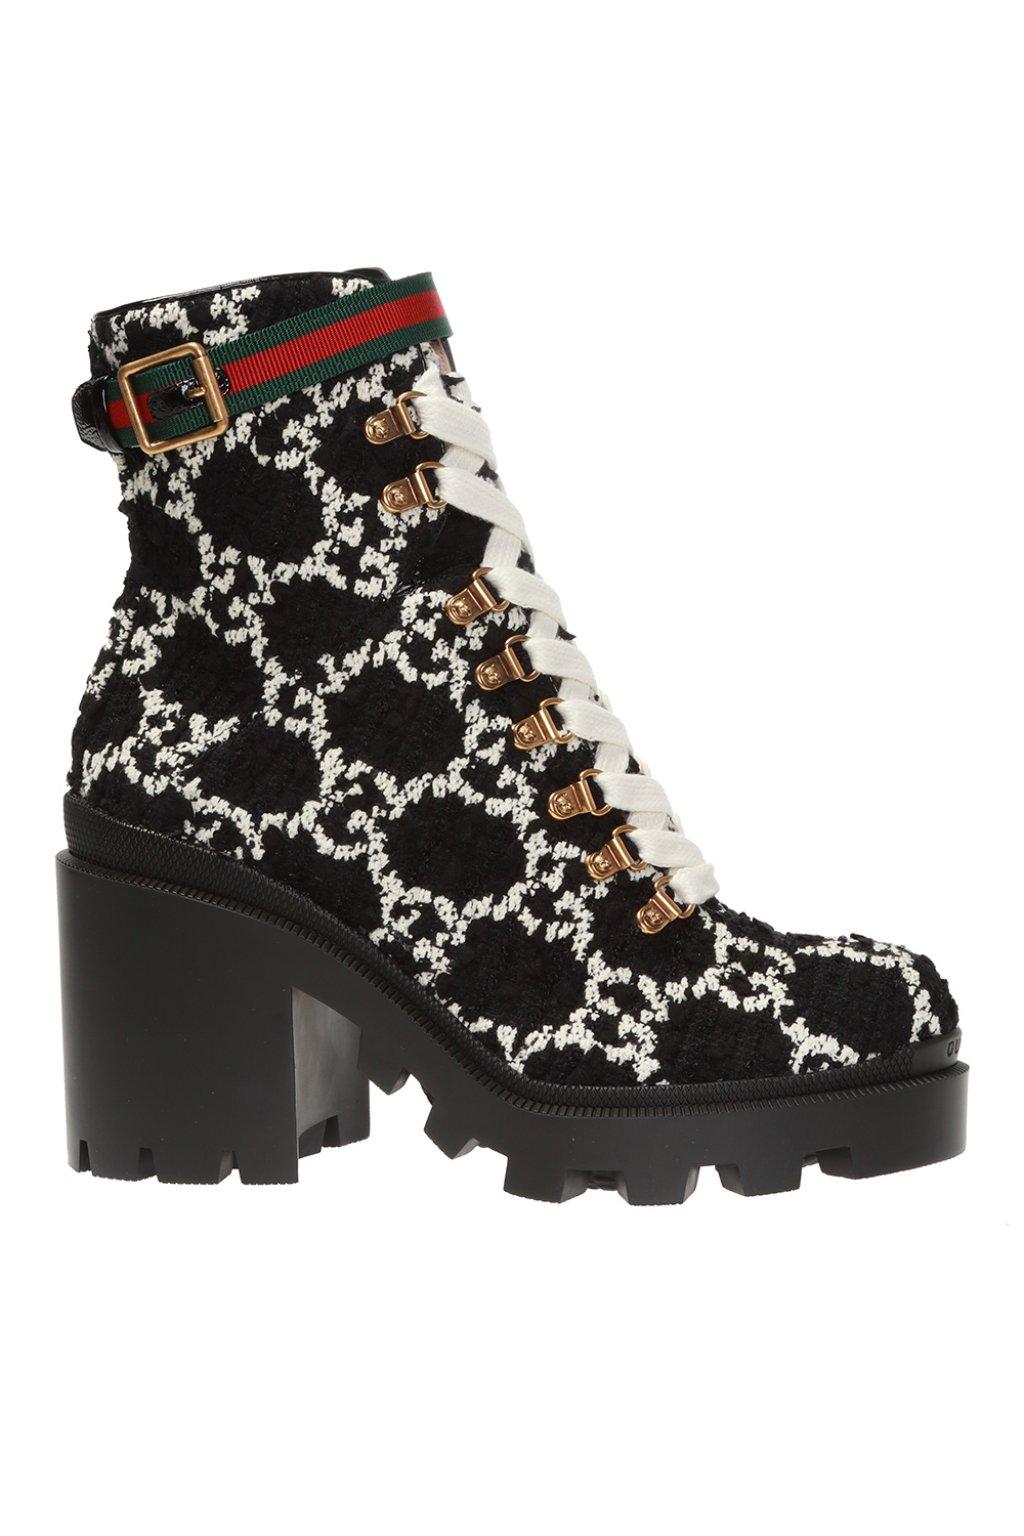 Gucci Leather GG Heeled Tweed Ankle Boots in Black - Save 26% - Lyst